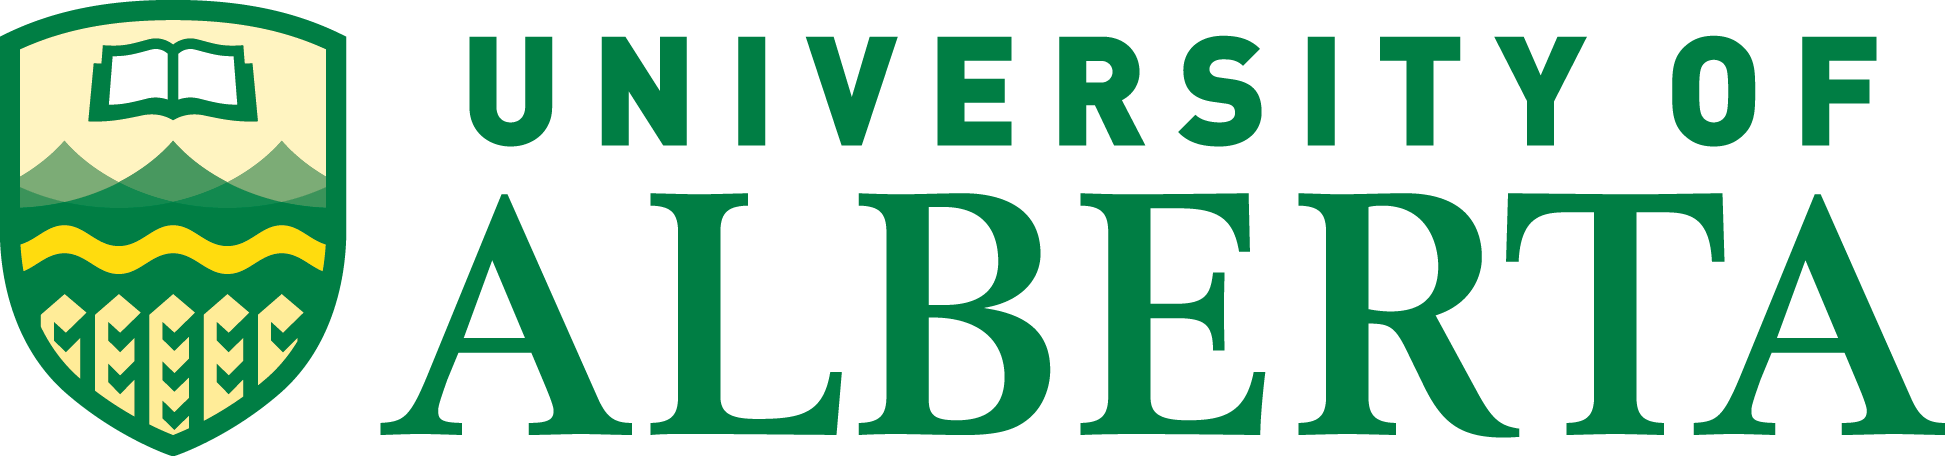 Logo for the University of Alberta that links to the university's main website